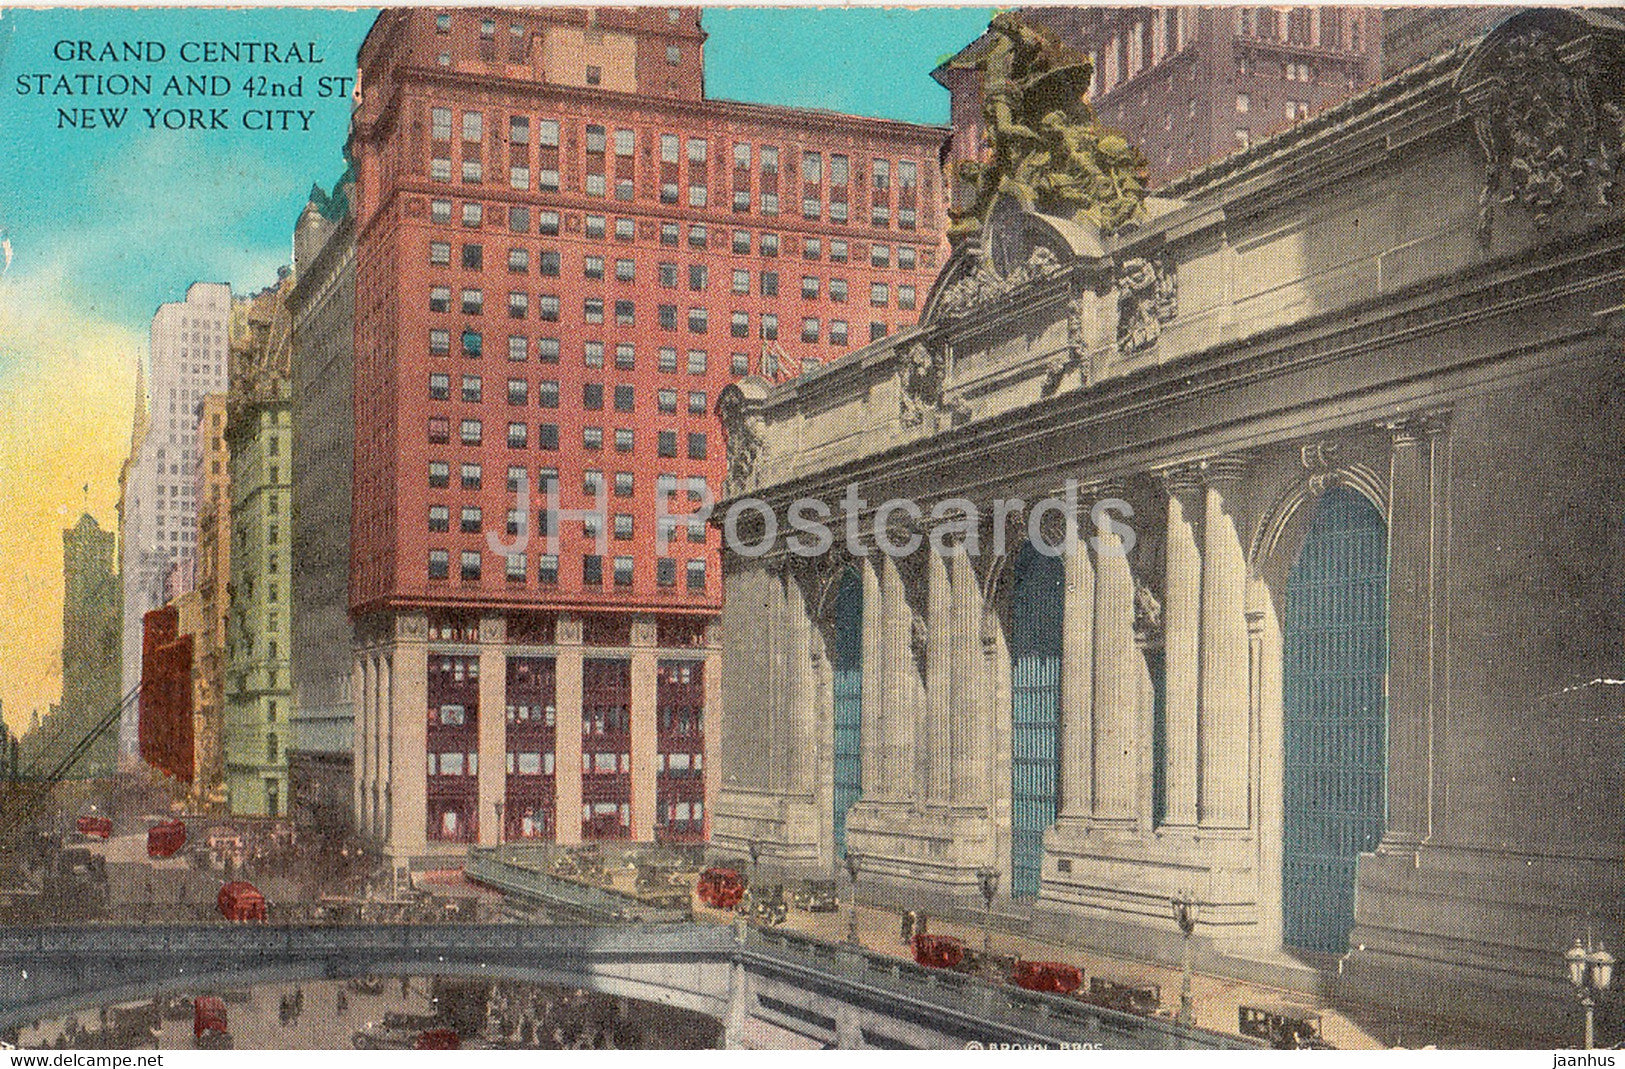 New York City - Grand Central Station and 42nd St  - old postcard - 1932 - United States - USA - used - JH Postcards